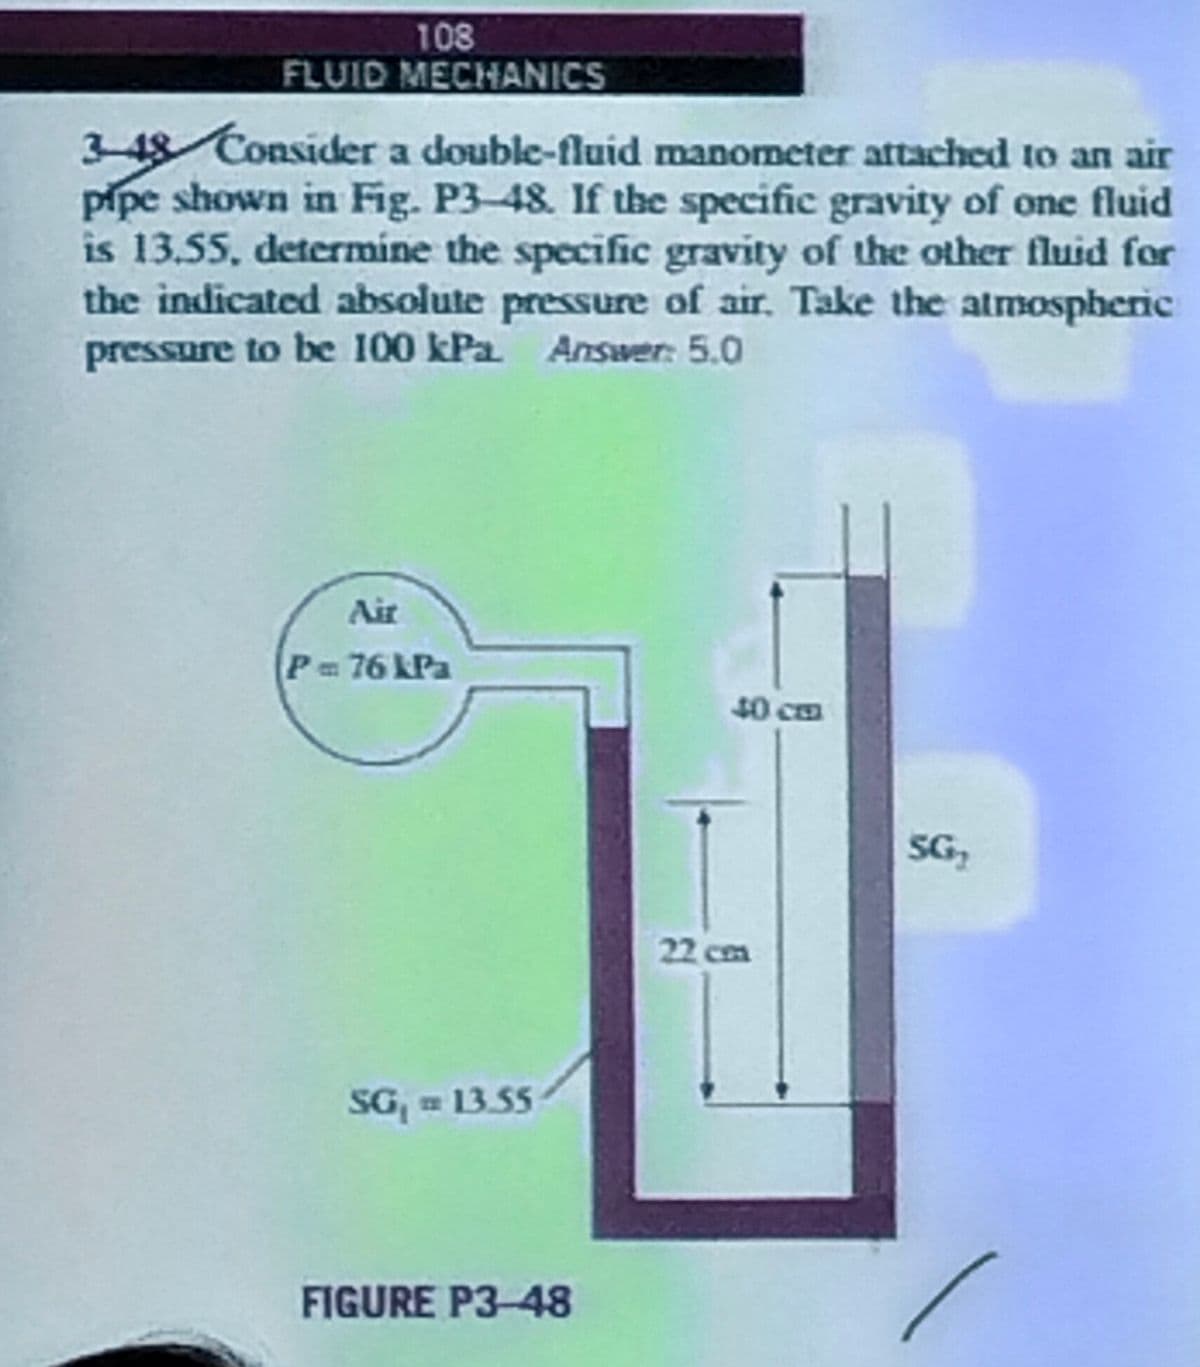 108
FLUID MECHANICS
3-48 Consider a double-fluid manometer attached to an air
pipe shown in Fig. P3-48. If the specific gravity of one fluid
is 13.55, determine the specific gravity of the other fluid for
the indicated absolute pressure of air. Take the atmospheric
pressure to be 100 kPa. Answer: 5.0
Air
P = 76 kPa
SG₁ = 13.55
FIGURE P3-48
40 cm
22 cm
SG₂